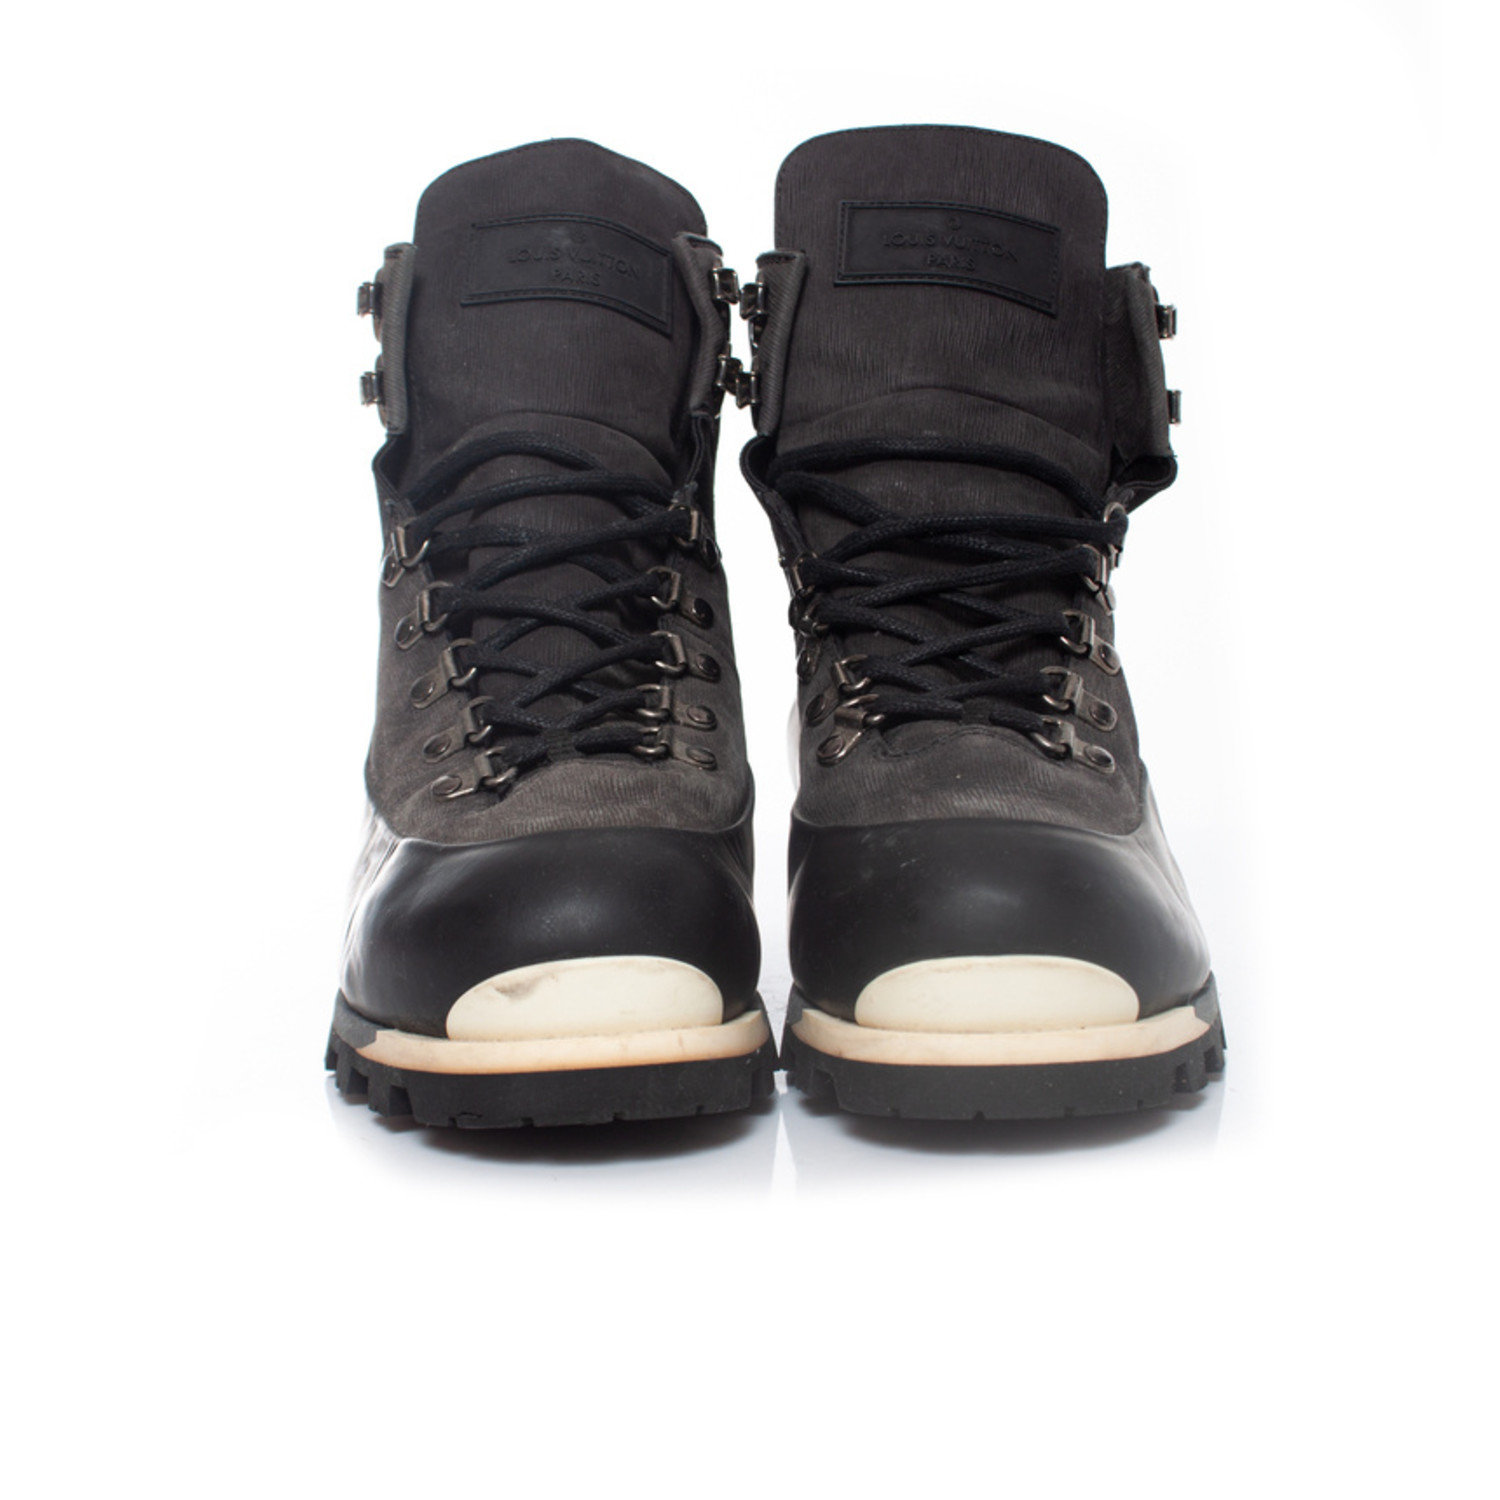 Louis Vuitton Leather Lace-Up Boots w/ Tags - ShopStyle